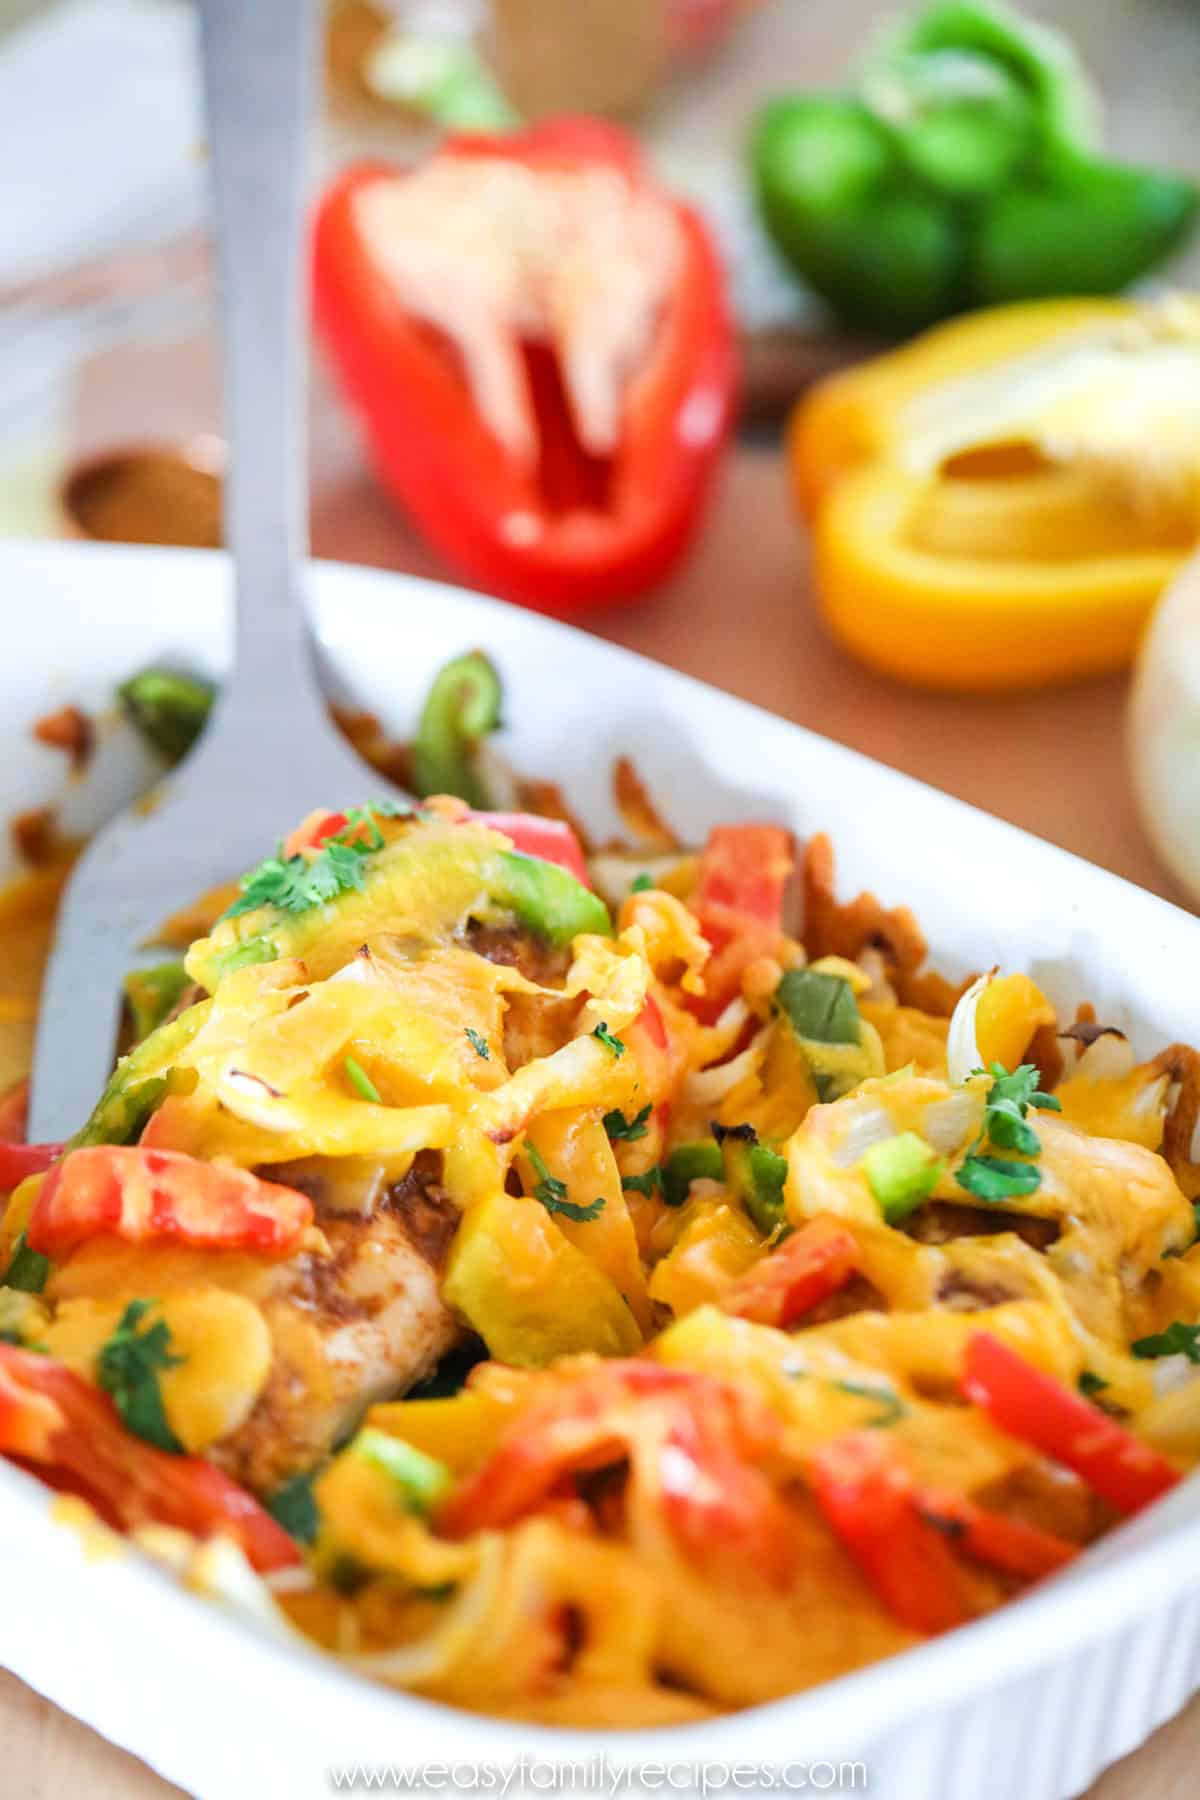 Quick Chicken Fajitas made in oven and topped with cheese and cilantro.